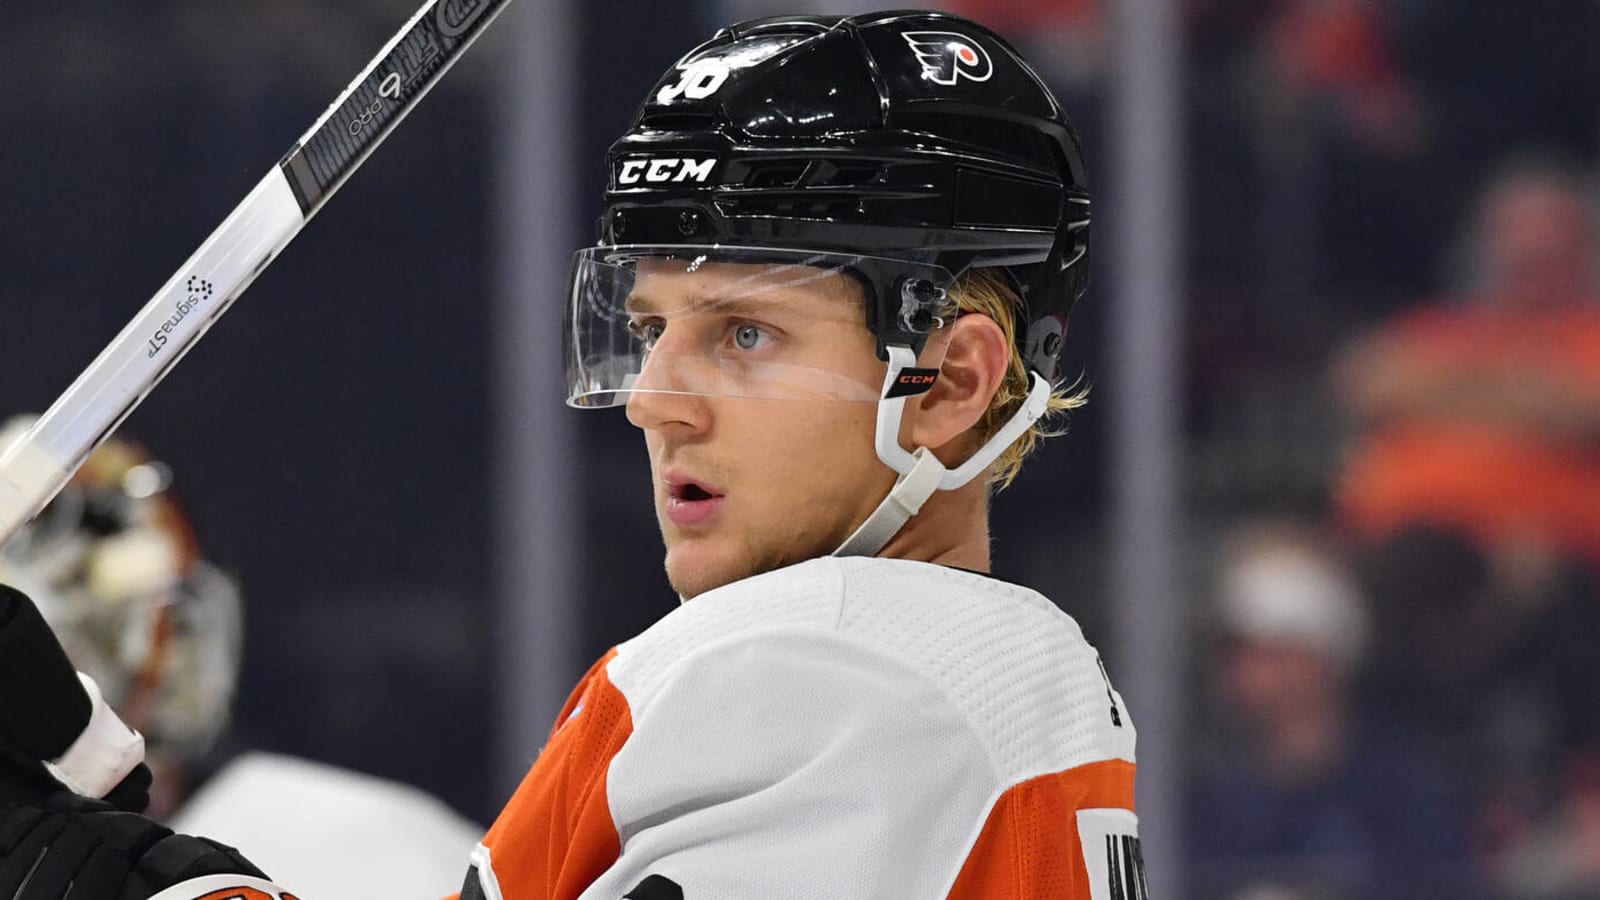 Should Flyers Give Emil Andrae a Try on Defense?